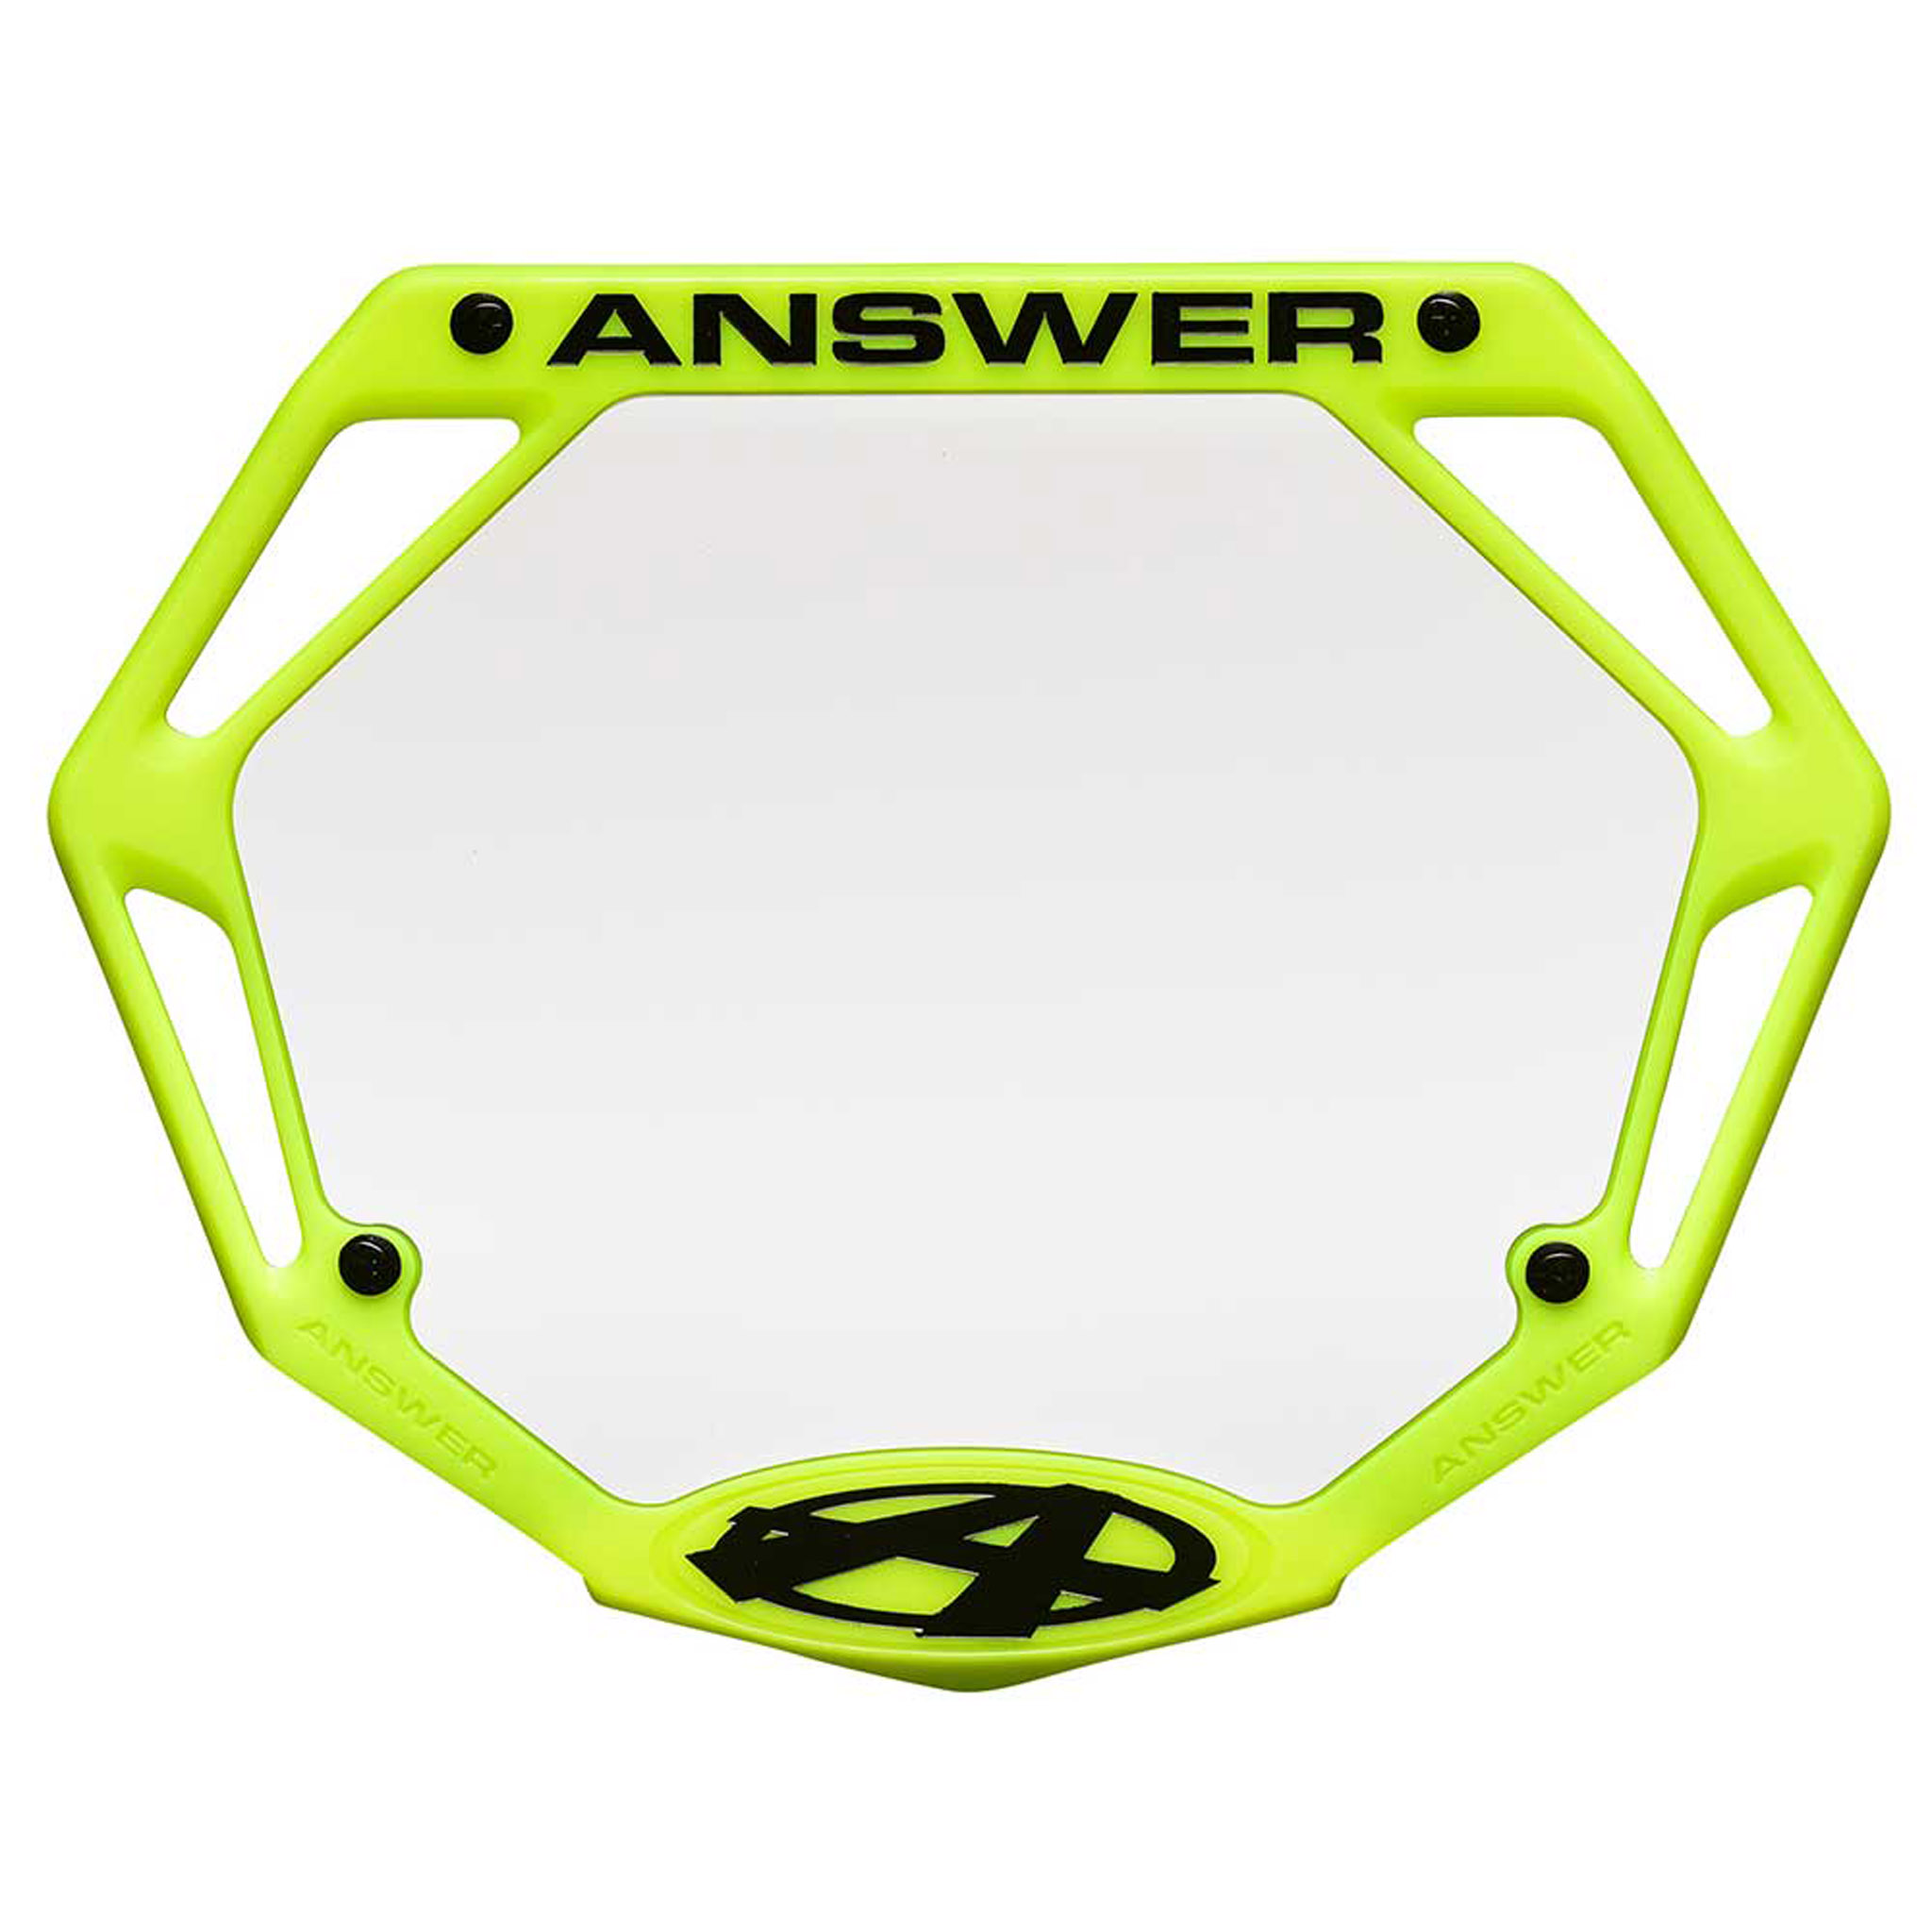 AnswerBMX 3D Number Plate, Mini, Flo Yellow